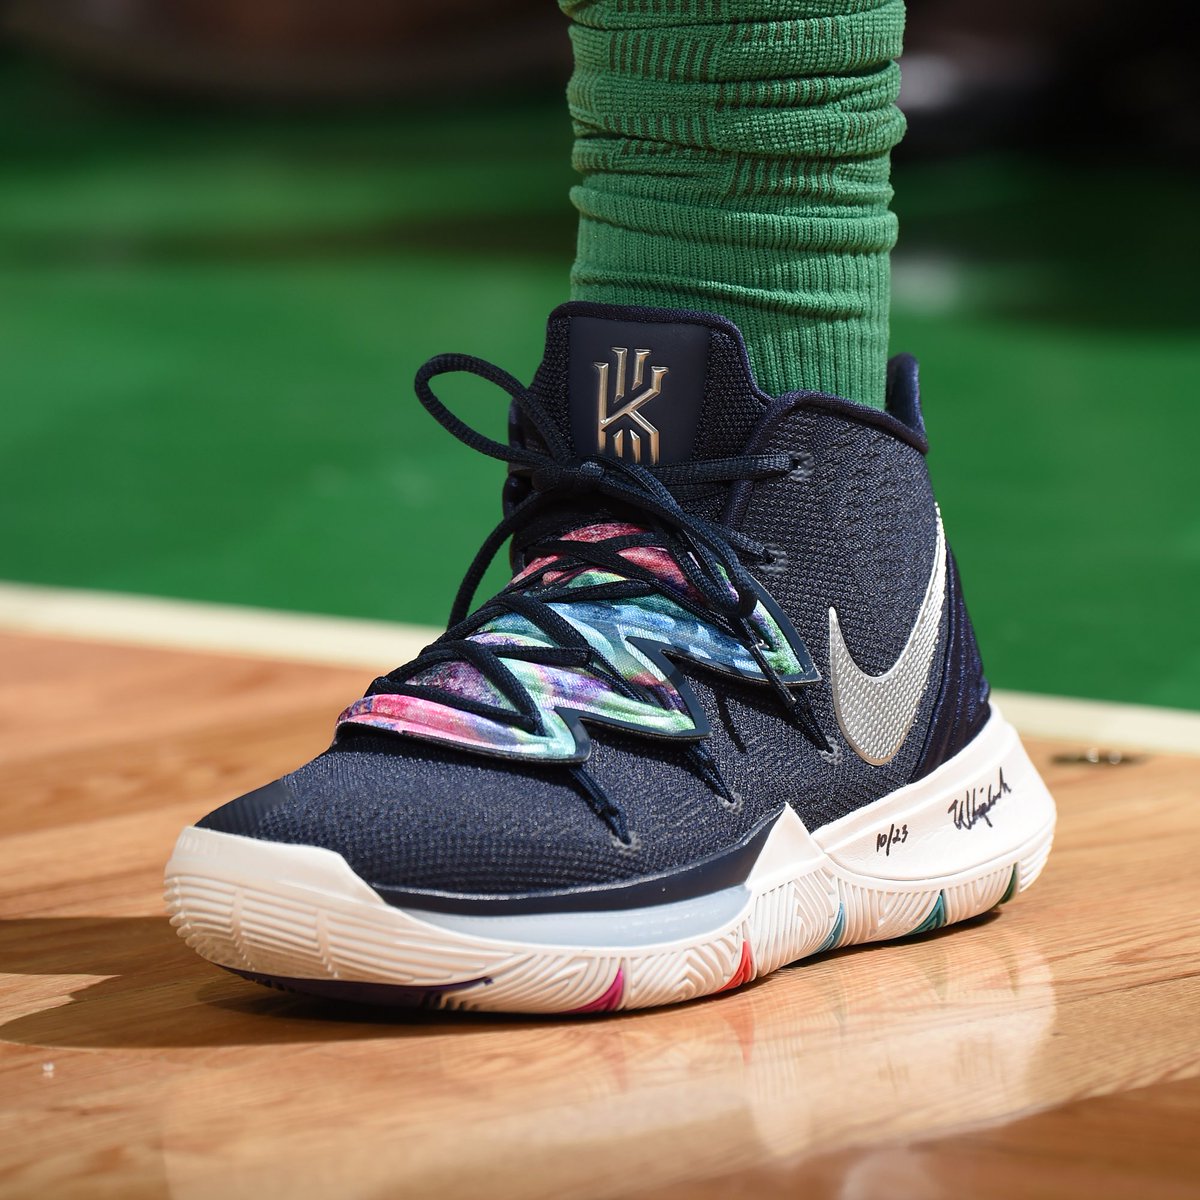 KYRIE IRVING 'S LAST TWO PE RELEASES NIKE KYRIE 5